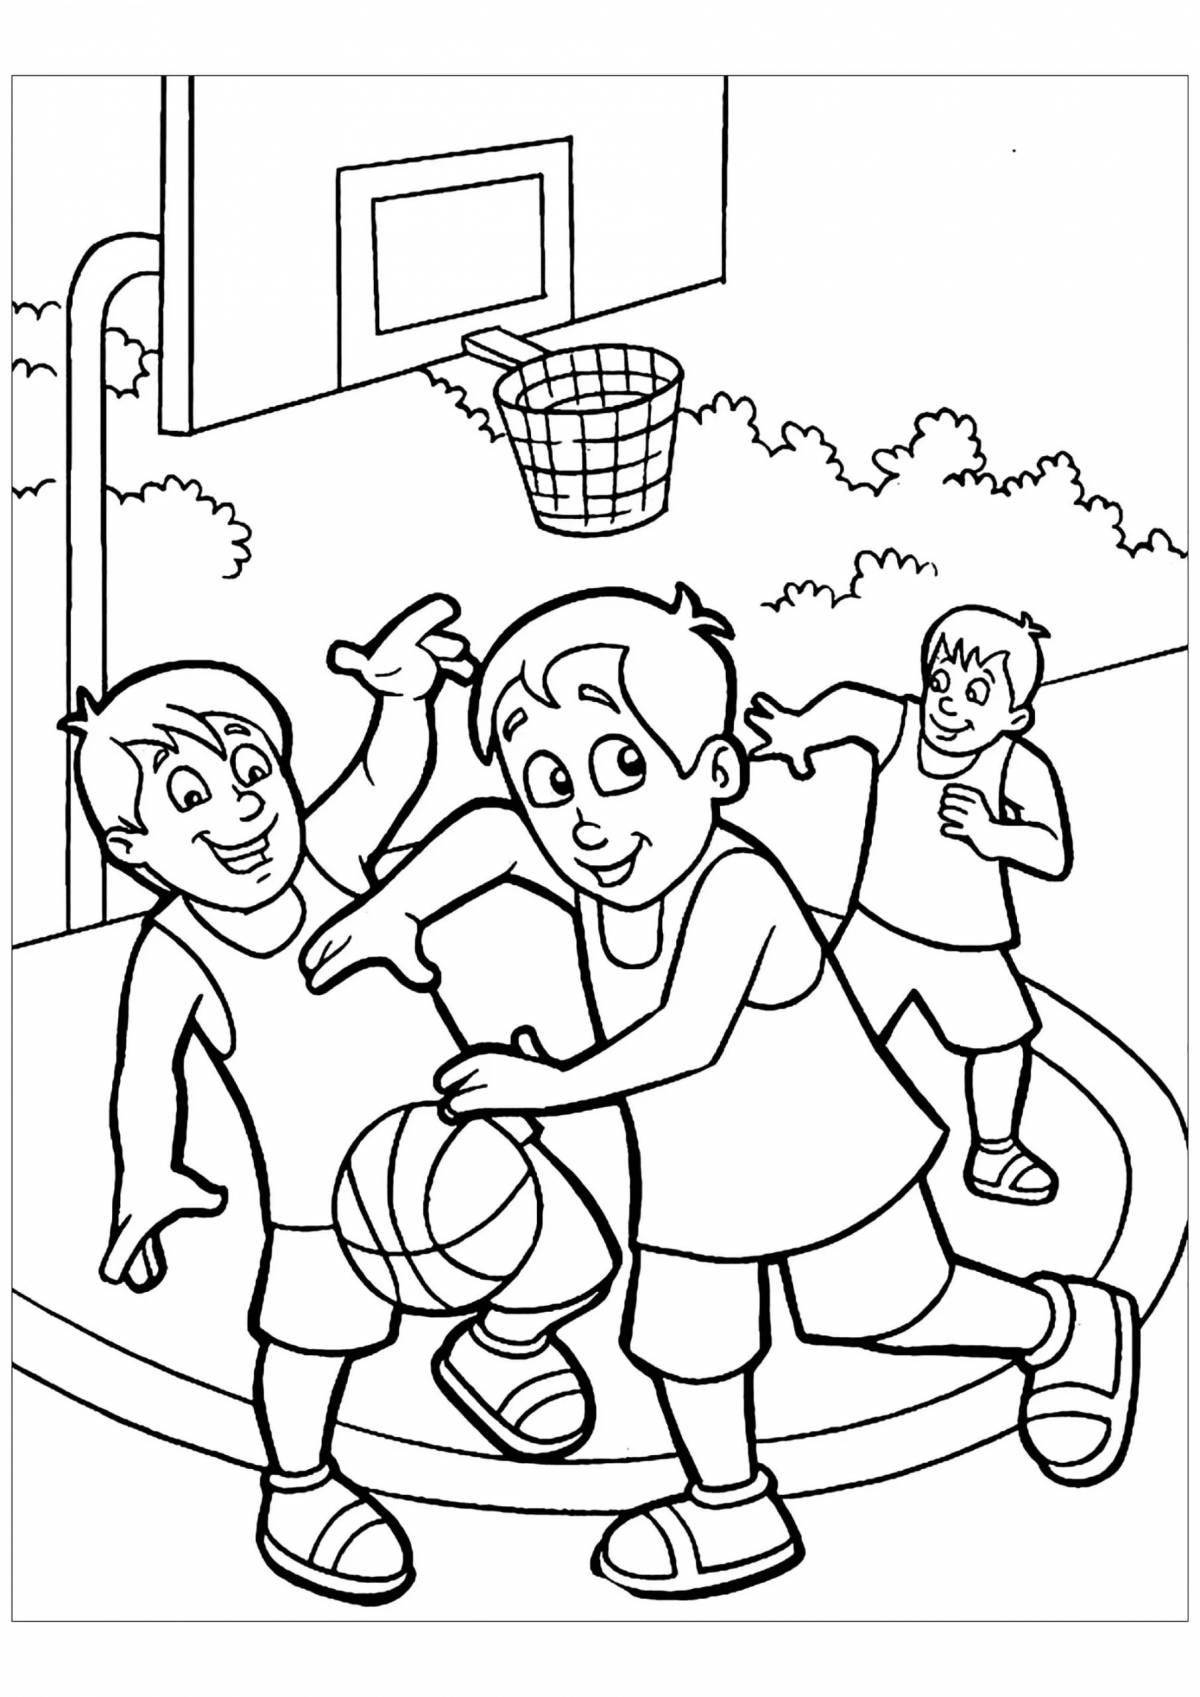 Stimulating health and sports coloring pages